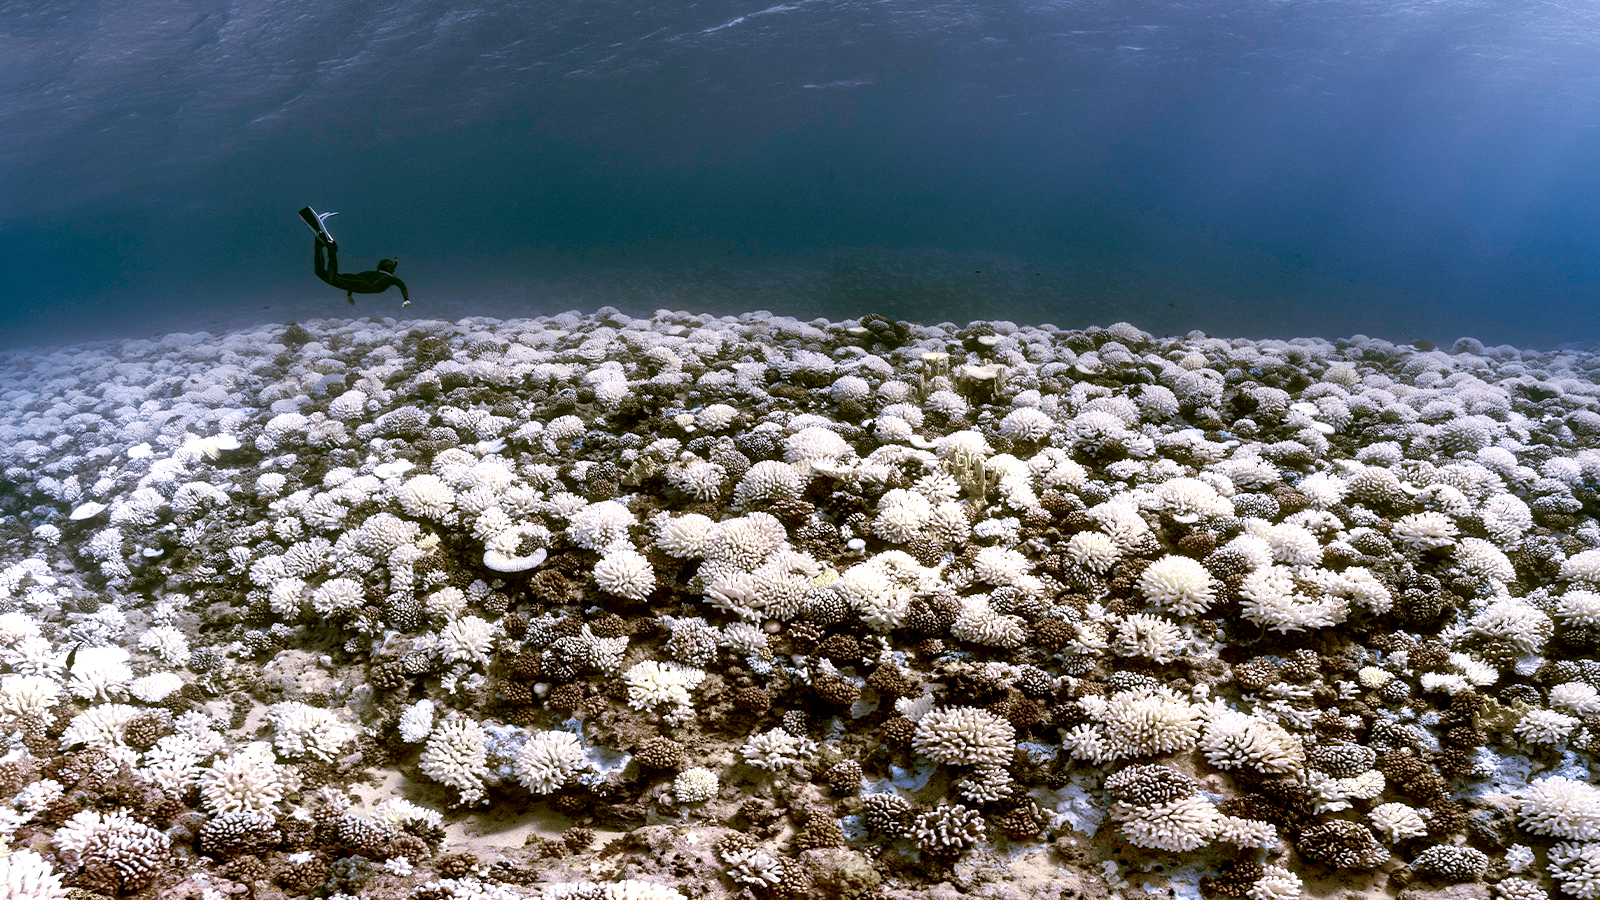 The world’s 4th coral bleaching event has officially arrived